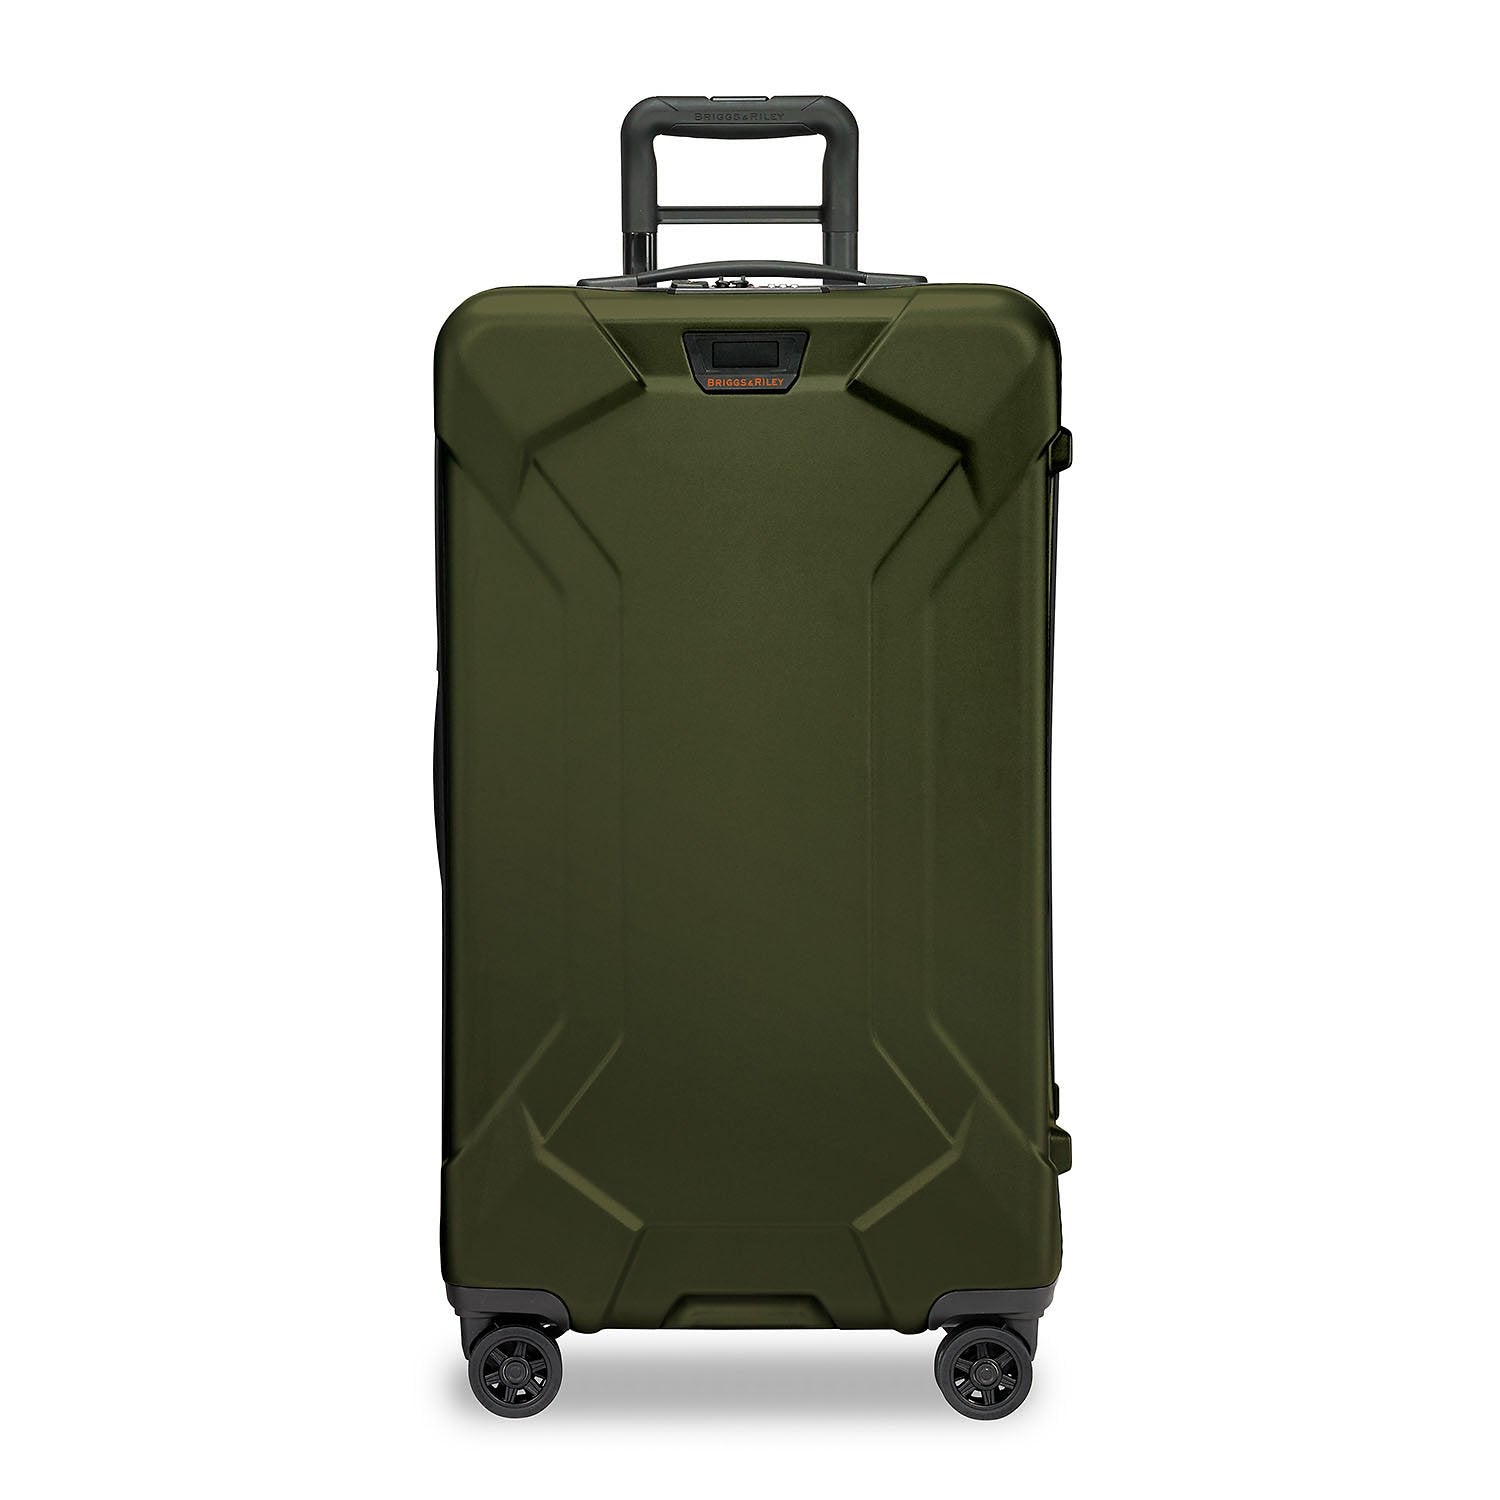 Buy It luggage Barberry Trolley Bag - 24 inch Online At Best Price @ Tata  CLiQ